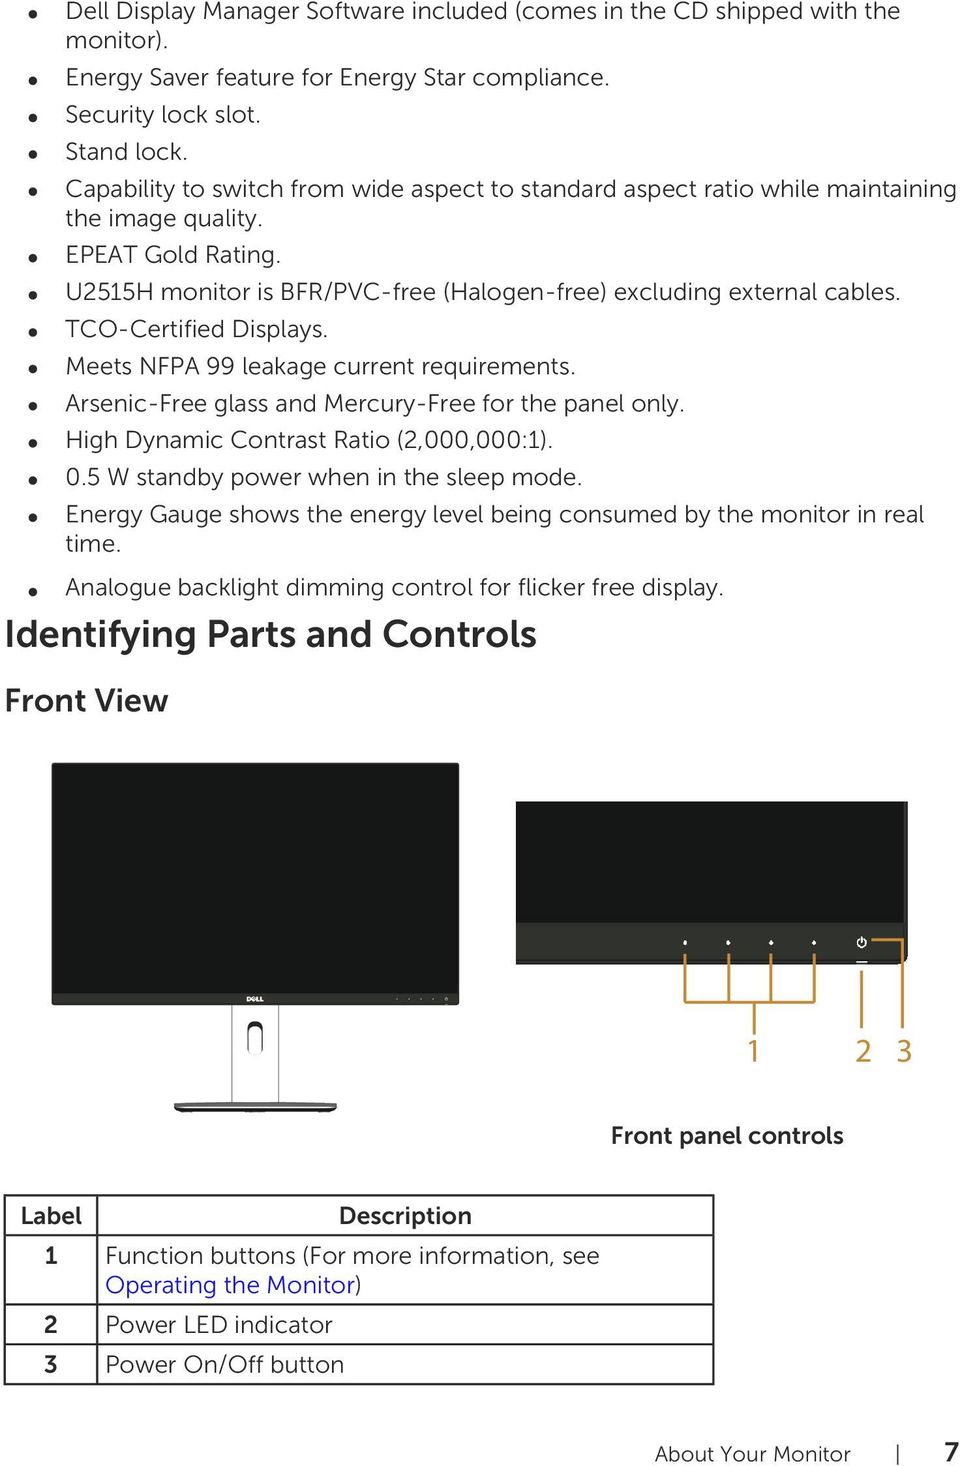 TCO-Certified Displays. Meets NFPA 99 leakage current requirements. Arsenic-Free glass and Mercury-Free for the panel only. High Dynamic Contrast Ratio (2,000,000:1). 0.